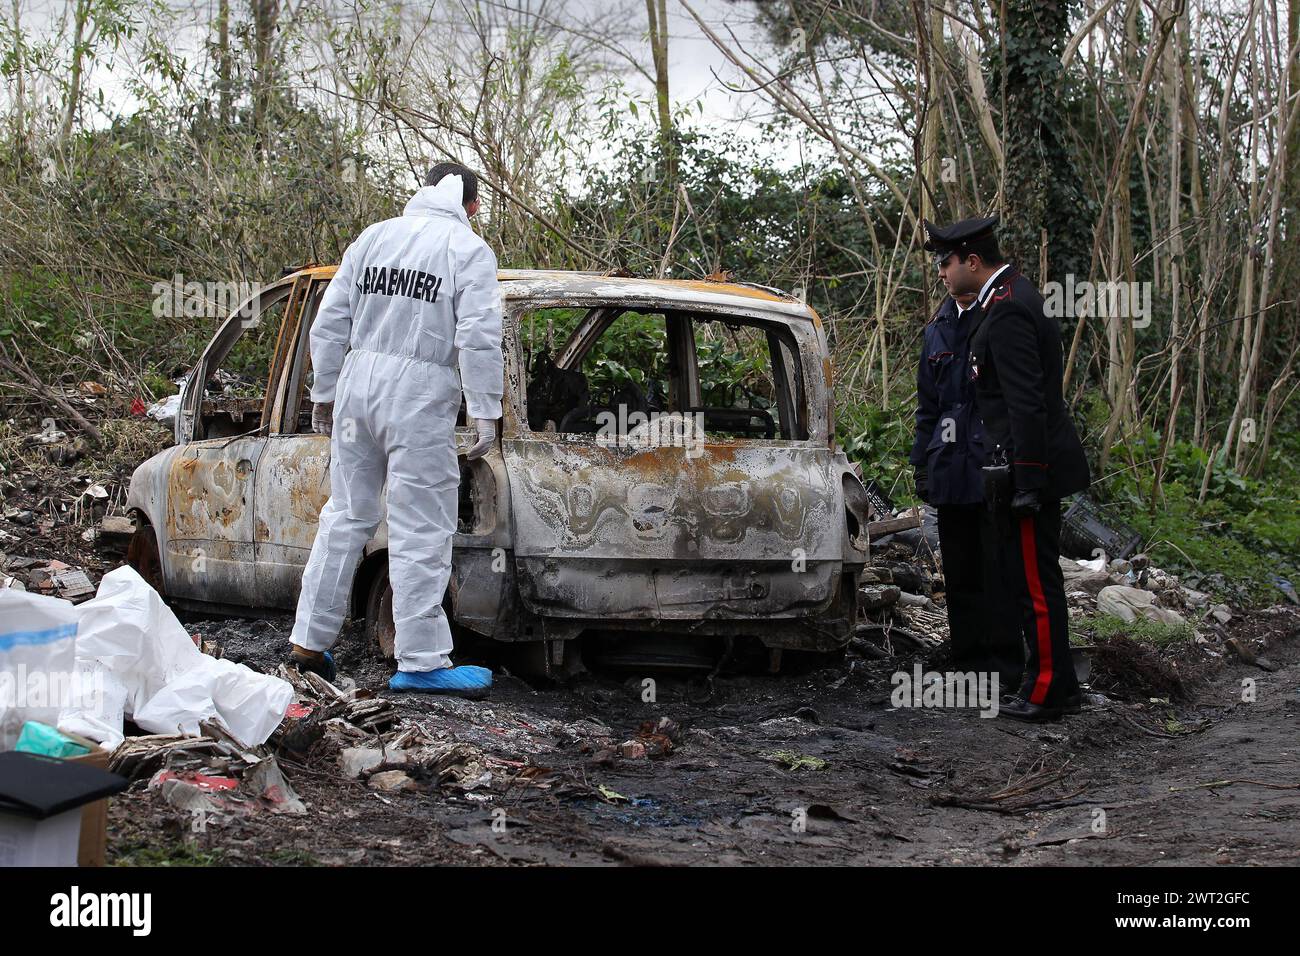 A charred corpse in a car burned on a country path. The scientific police and the Carabinieri are close to the car Stock Photo